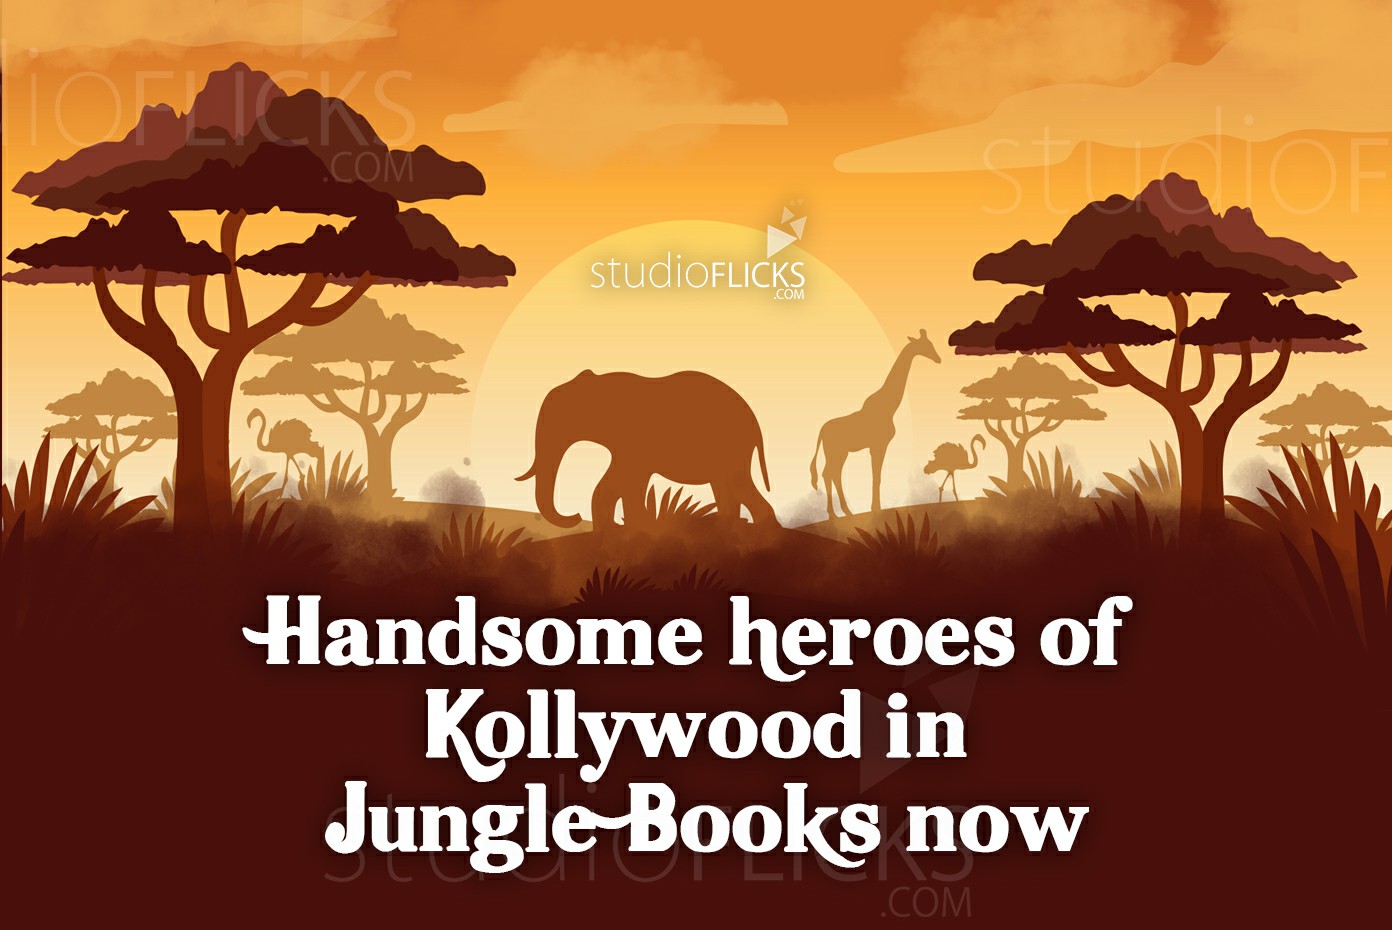 Handsome heroes of Kollywood in Jungle Books now.